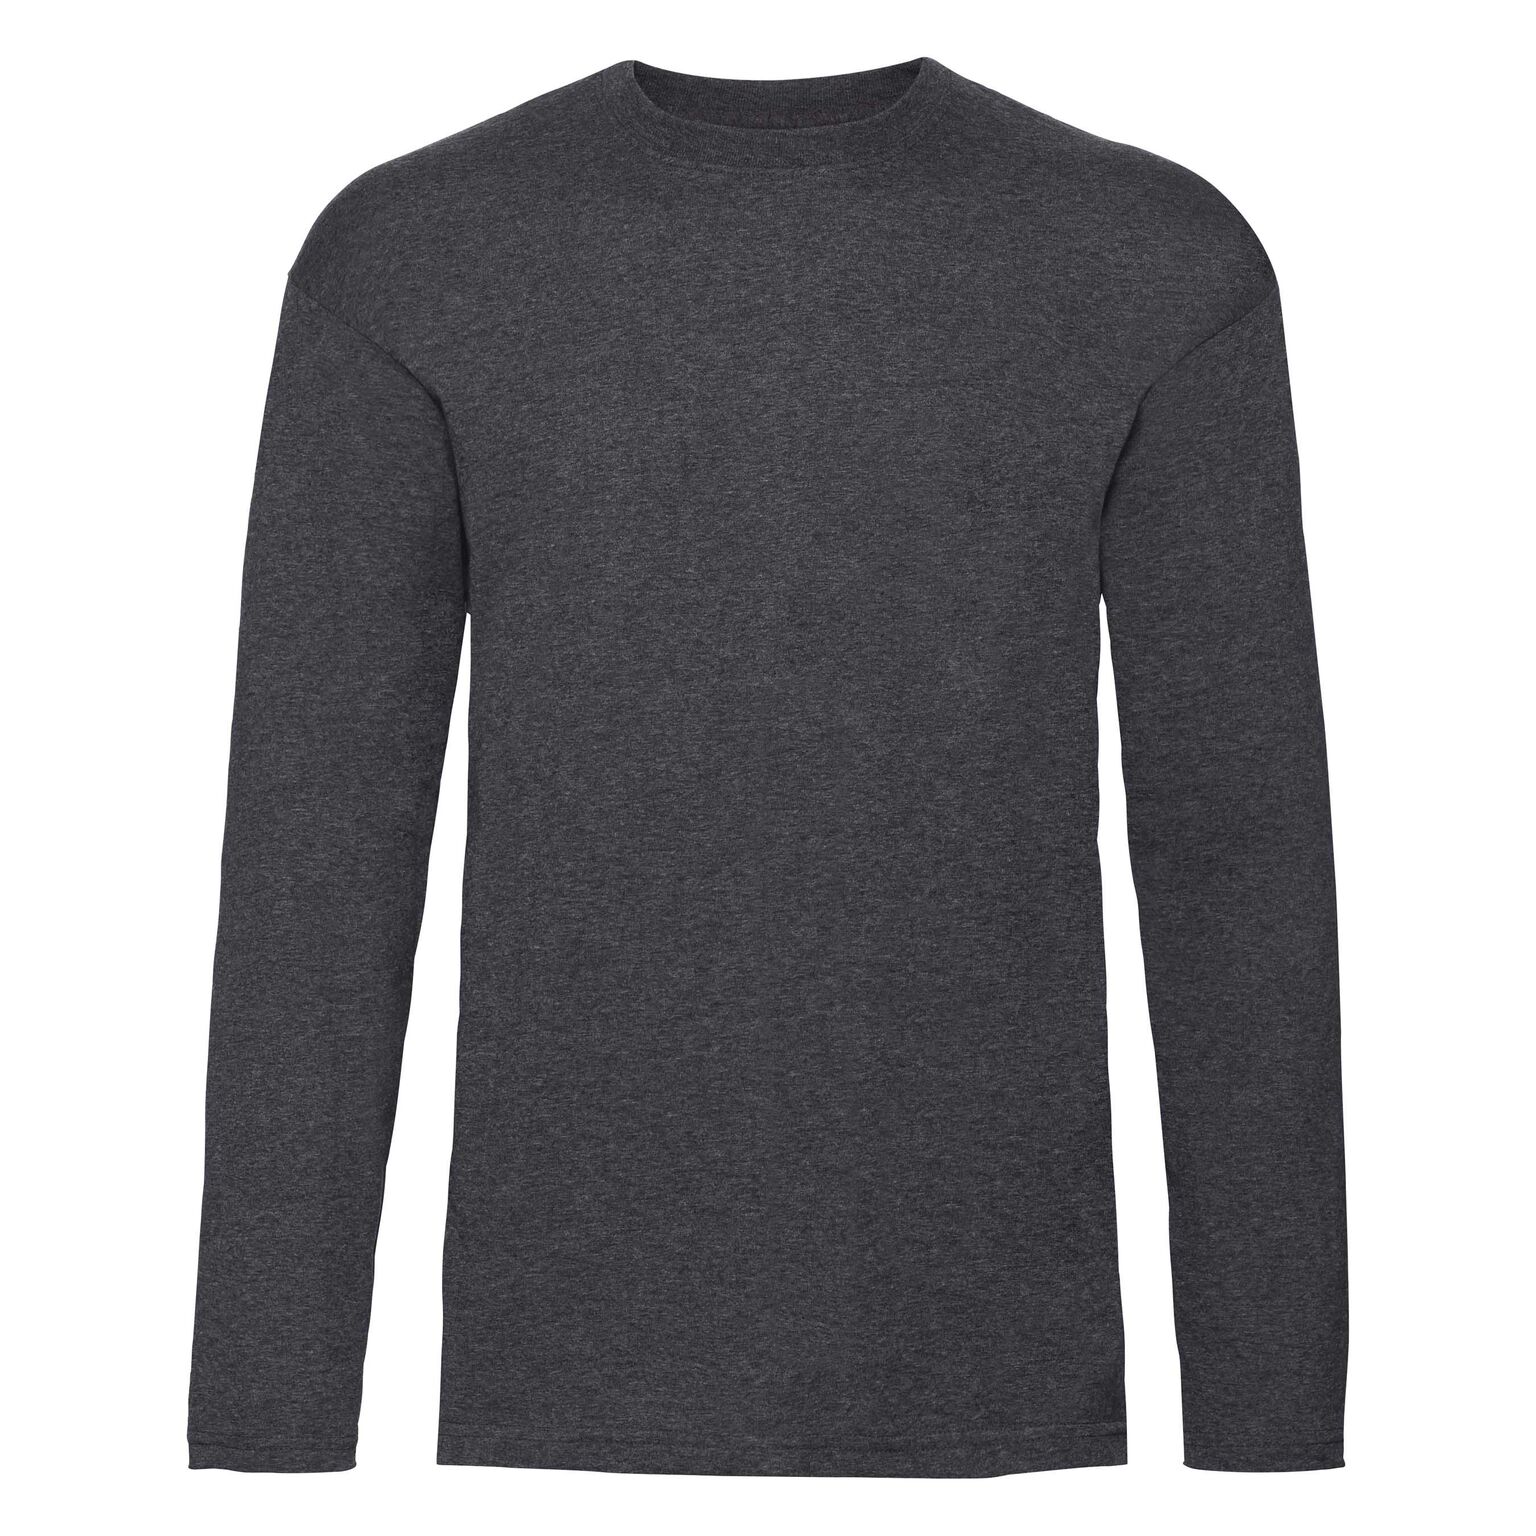 VALUEWEIGHT LONG SLEEVE T | Fruit of the Loom